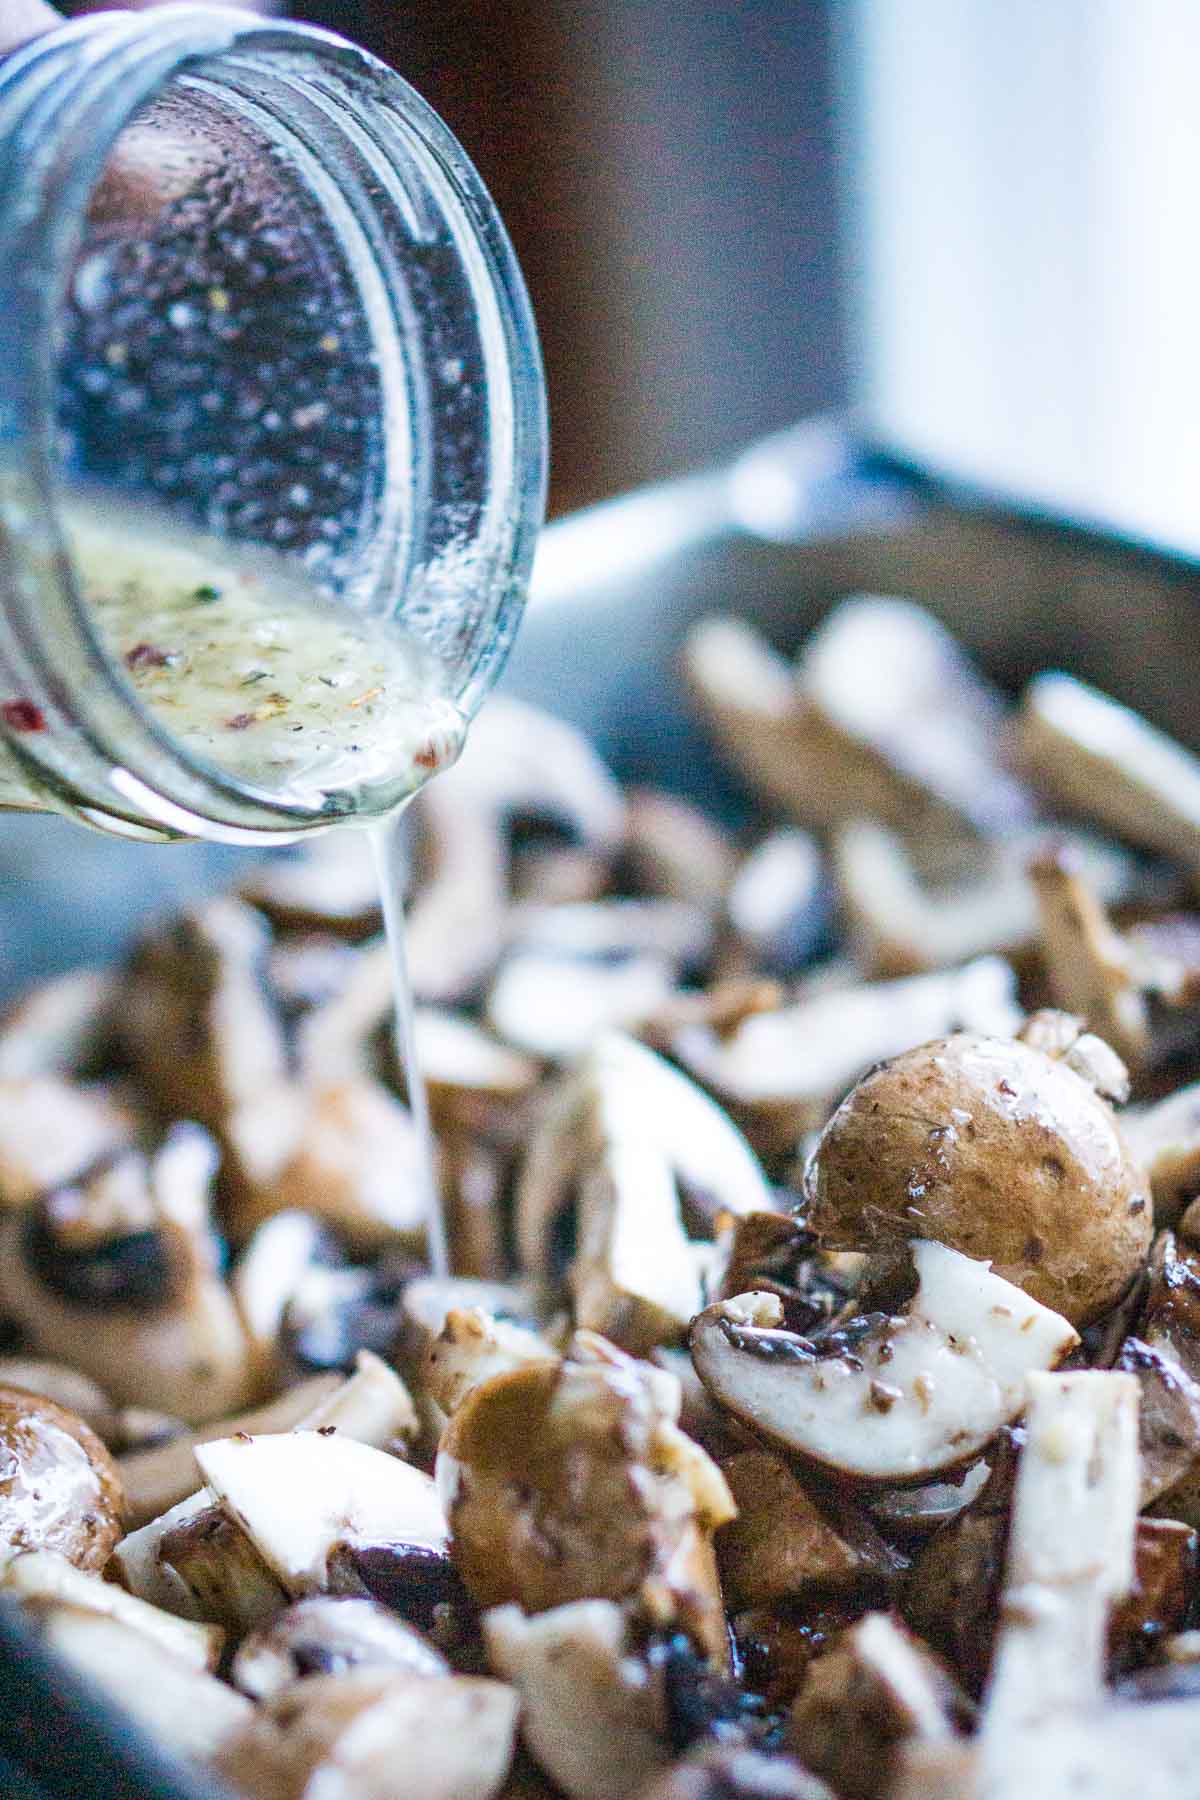 Italian dressing is poured into mushrooms in stainless steel pan